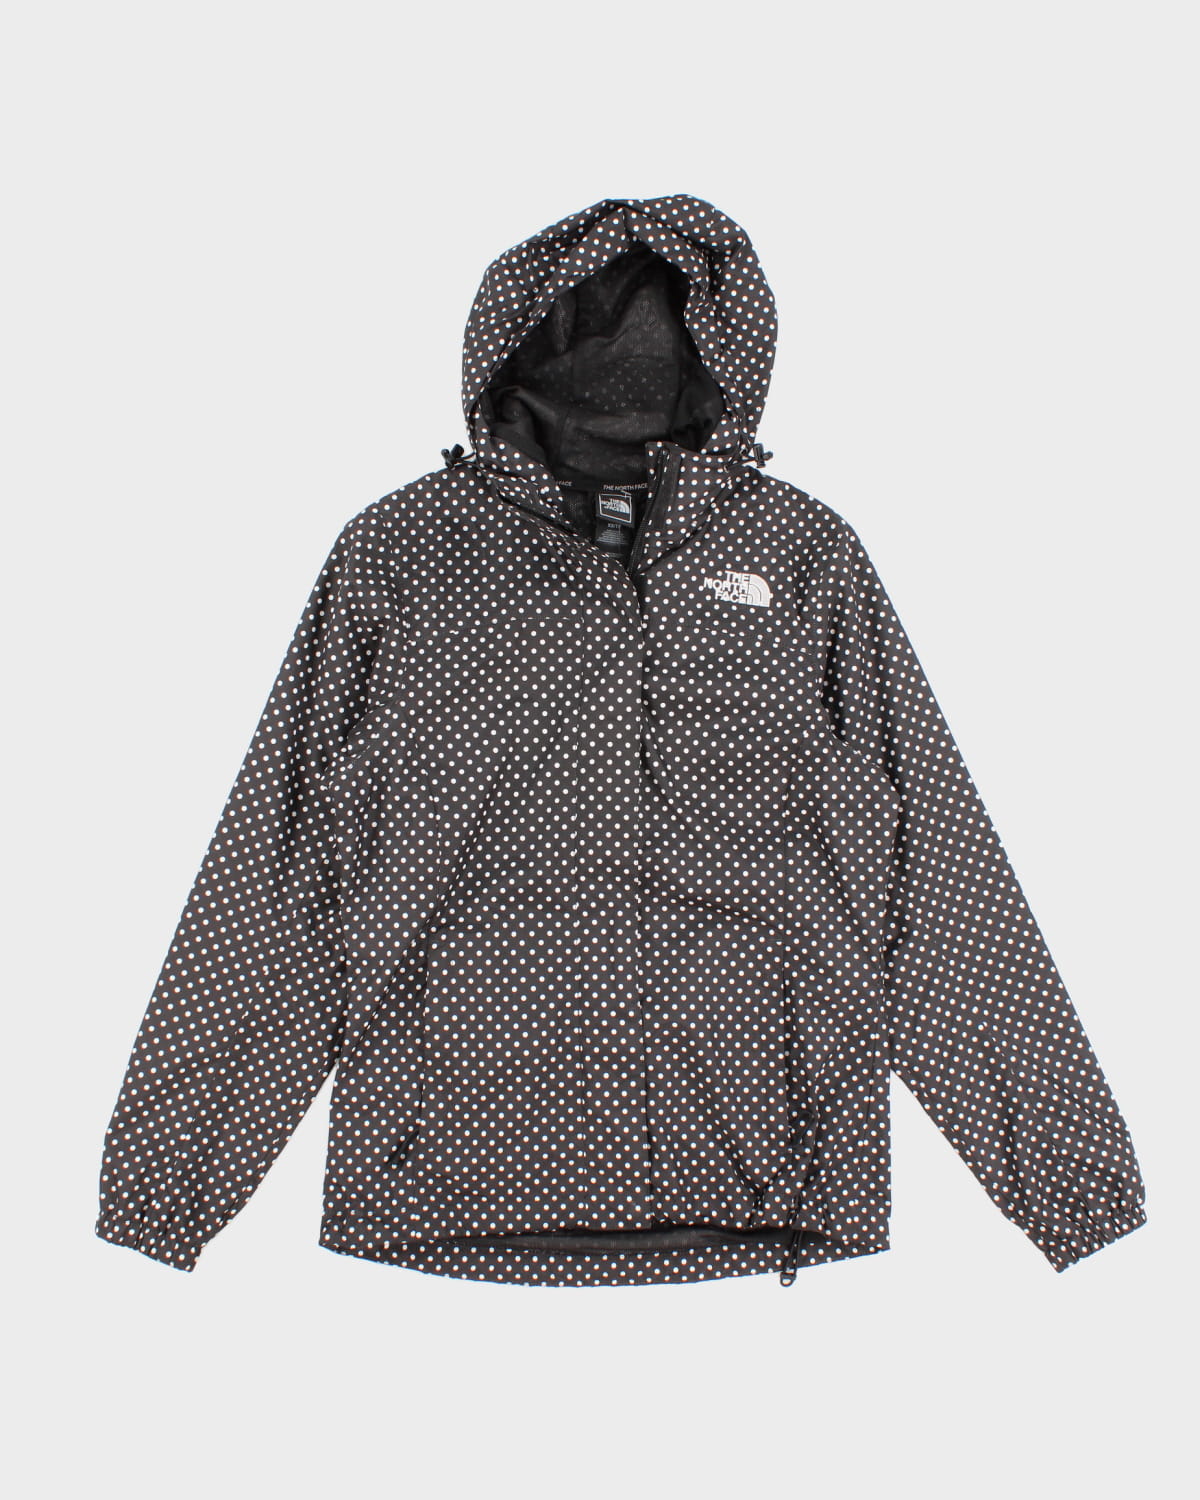 The North Face Women's Polka Dot Hooded Jacket - XS